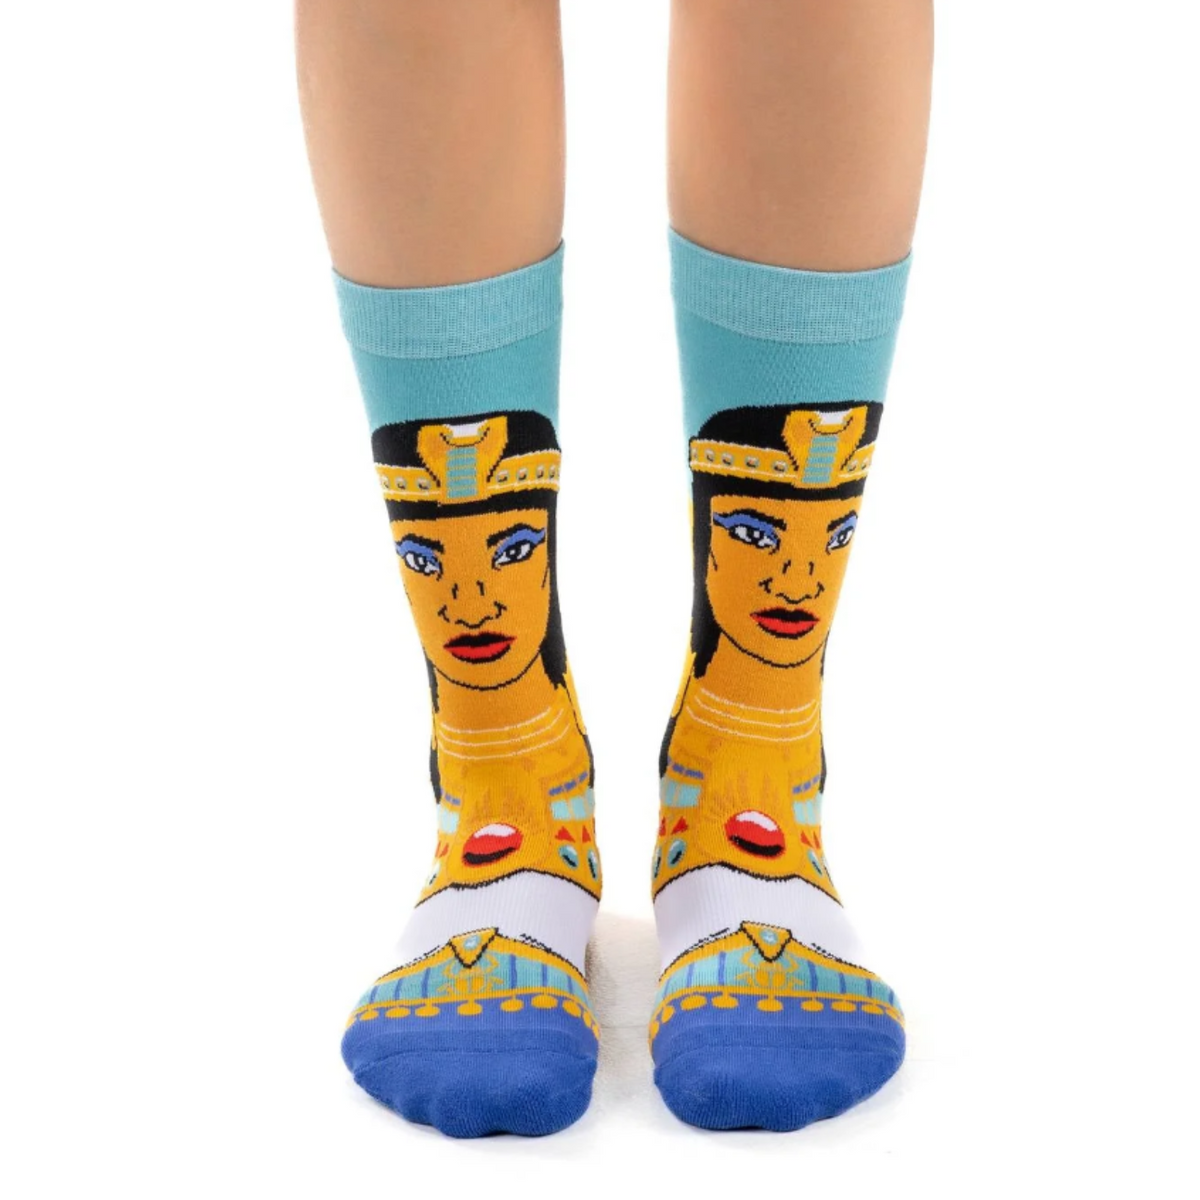 Worn by a model, Good Luck Sock Cleopatra women&#39;s sock featuring the face of Cleopatra wearing a crown